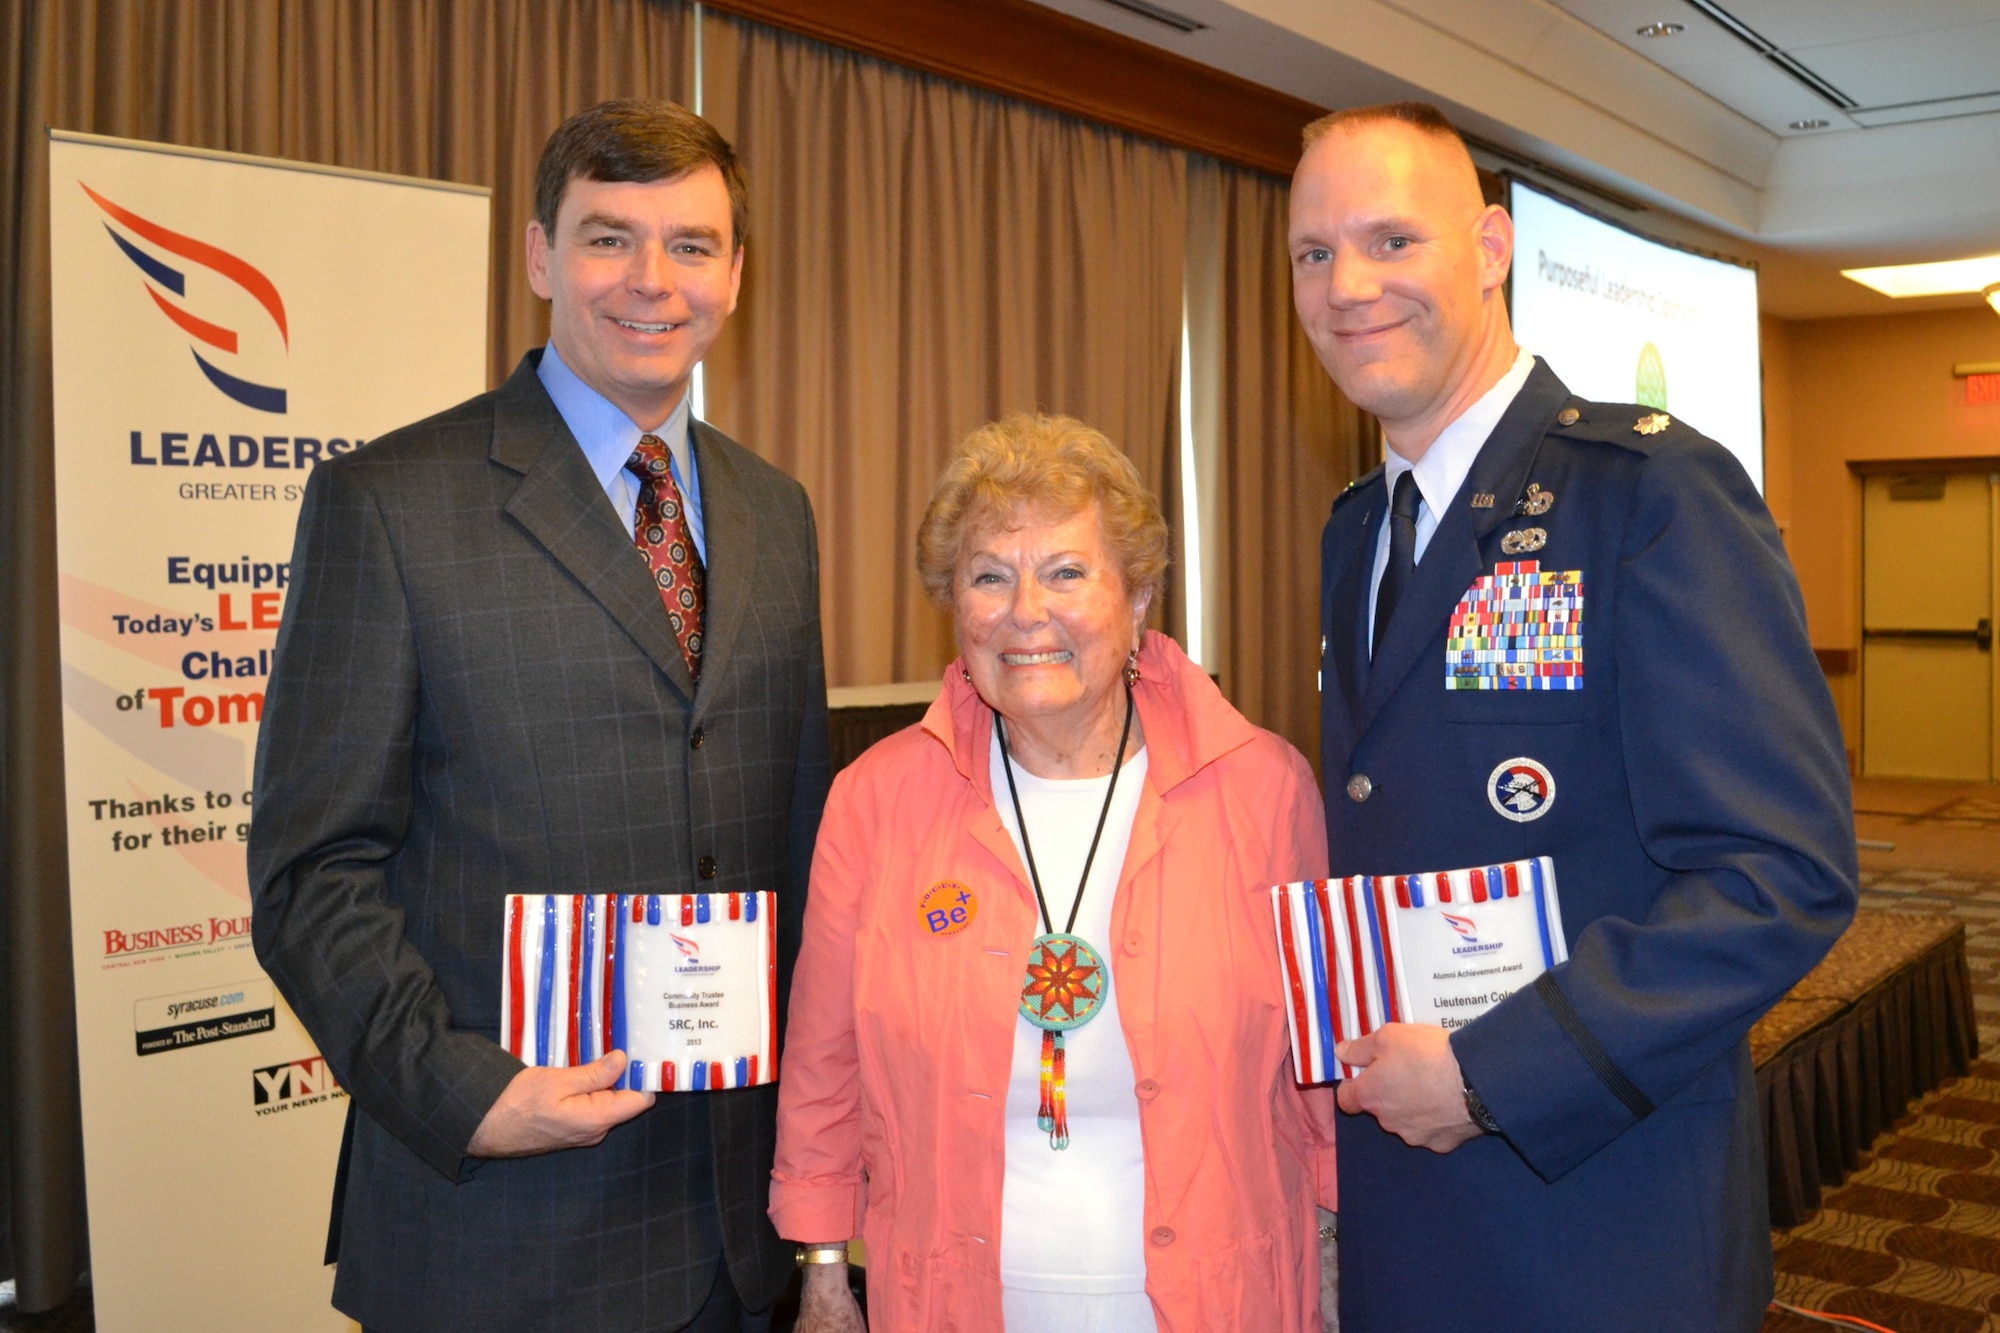 New York Air National Guard Lt. Col. Edward Cook (right) poses with fellow receiptients of the Leadership Greater Syracuse (LGS) Distinguished Community Leader Awards during a ceremony held on on April 25, 2013.  Lt. Col. Cook is the Logistrics Readiness Squadron Commander for the 174th Attack Wing, Hancock Field Air National Guard Base, Syracuse, New York, and was a LGS 2010 graduate.  (photo by New York Air National Guard Lt. Col. Catherine Hutson).